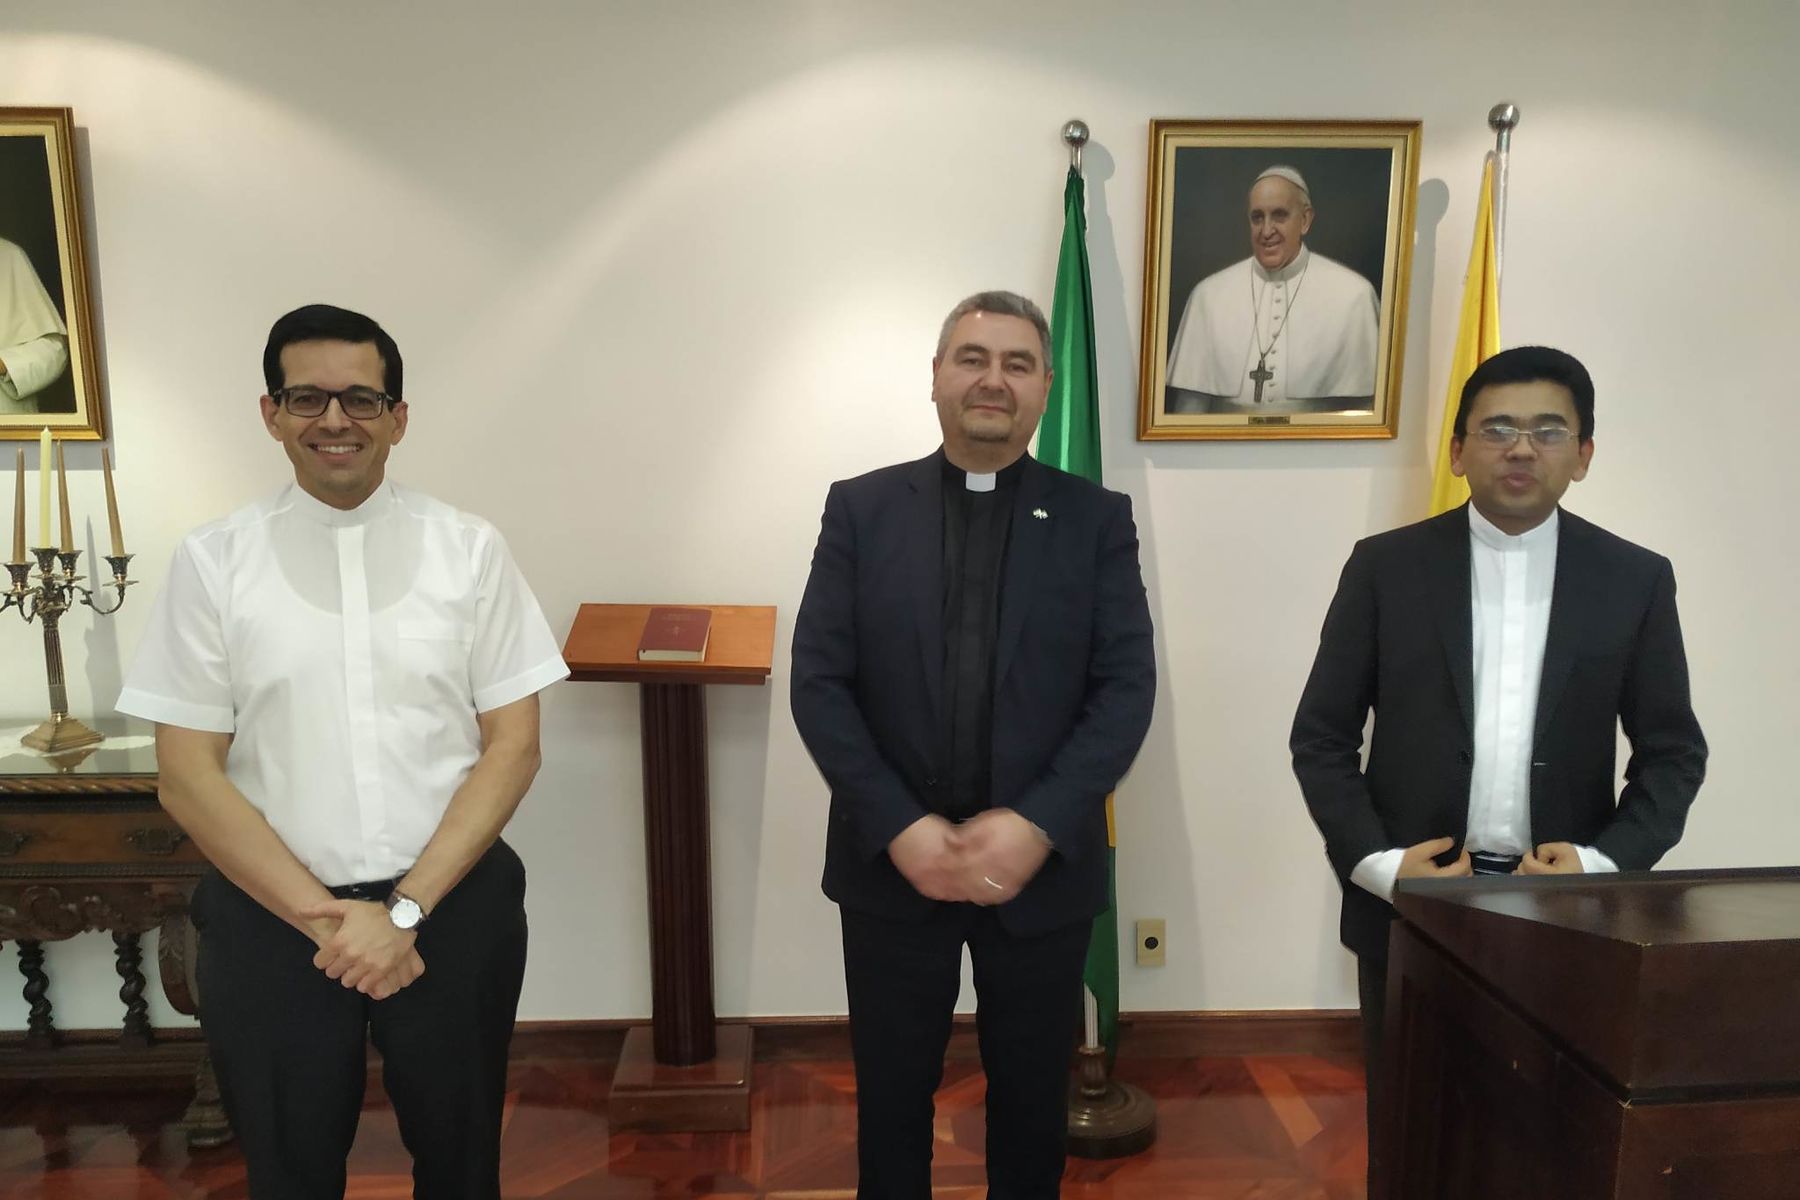 Head of the UGCC Commission on Interconfessional and Interreligious Relations visits the Apostolic Nunciature in Brazil